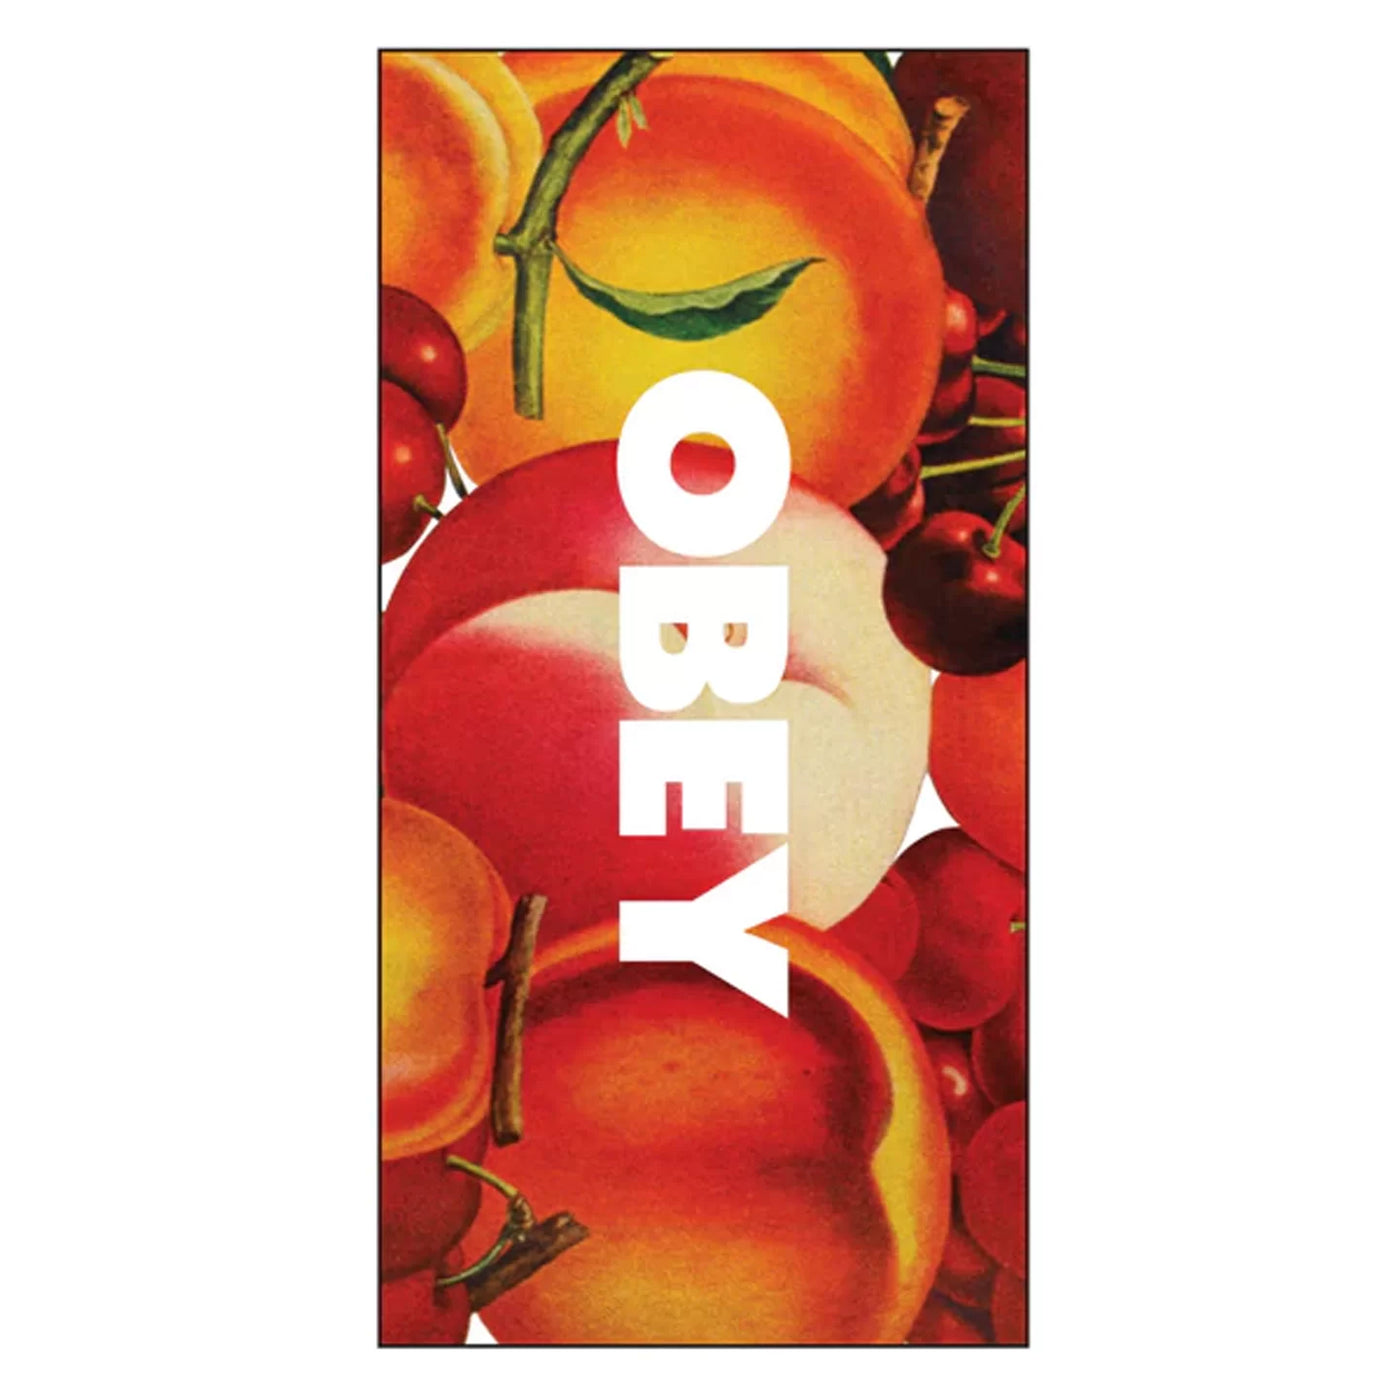 Obey Fruits Towel - Multi